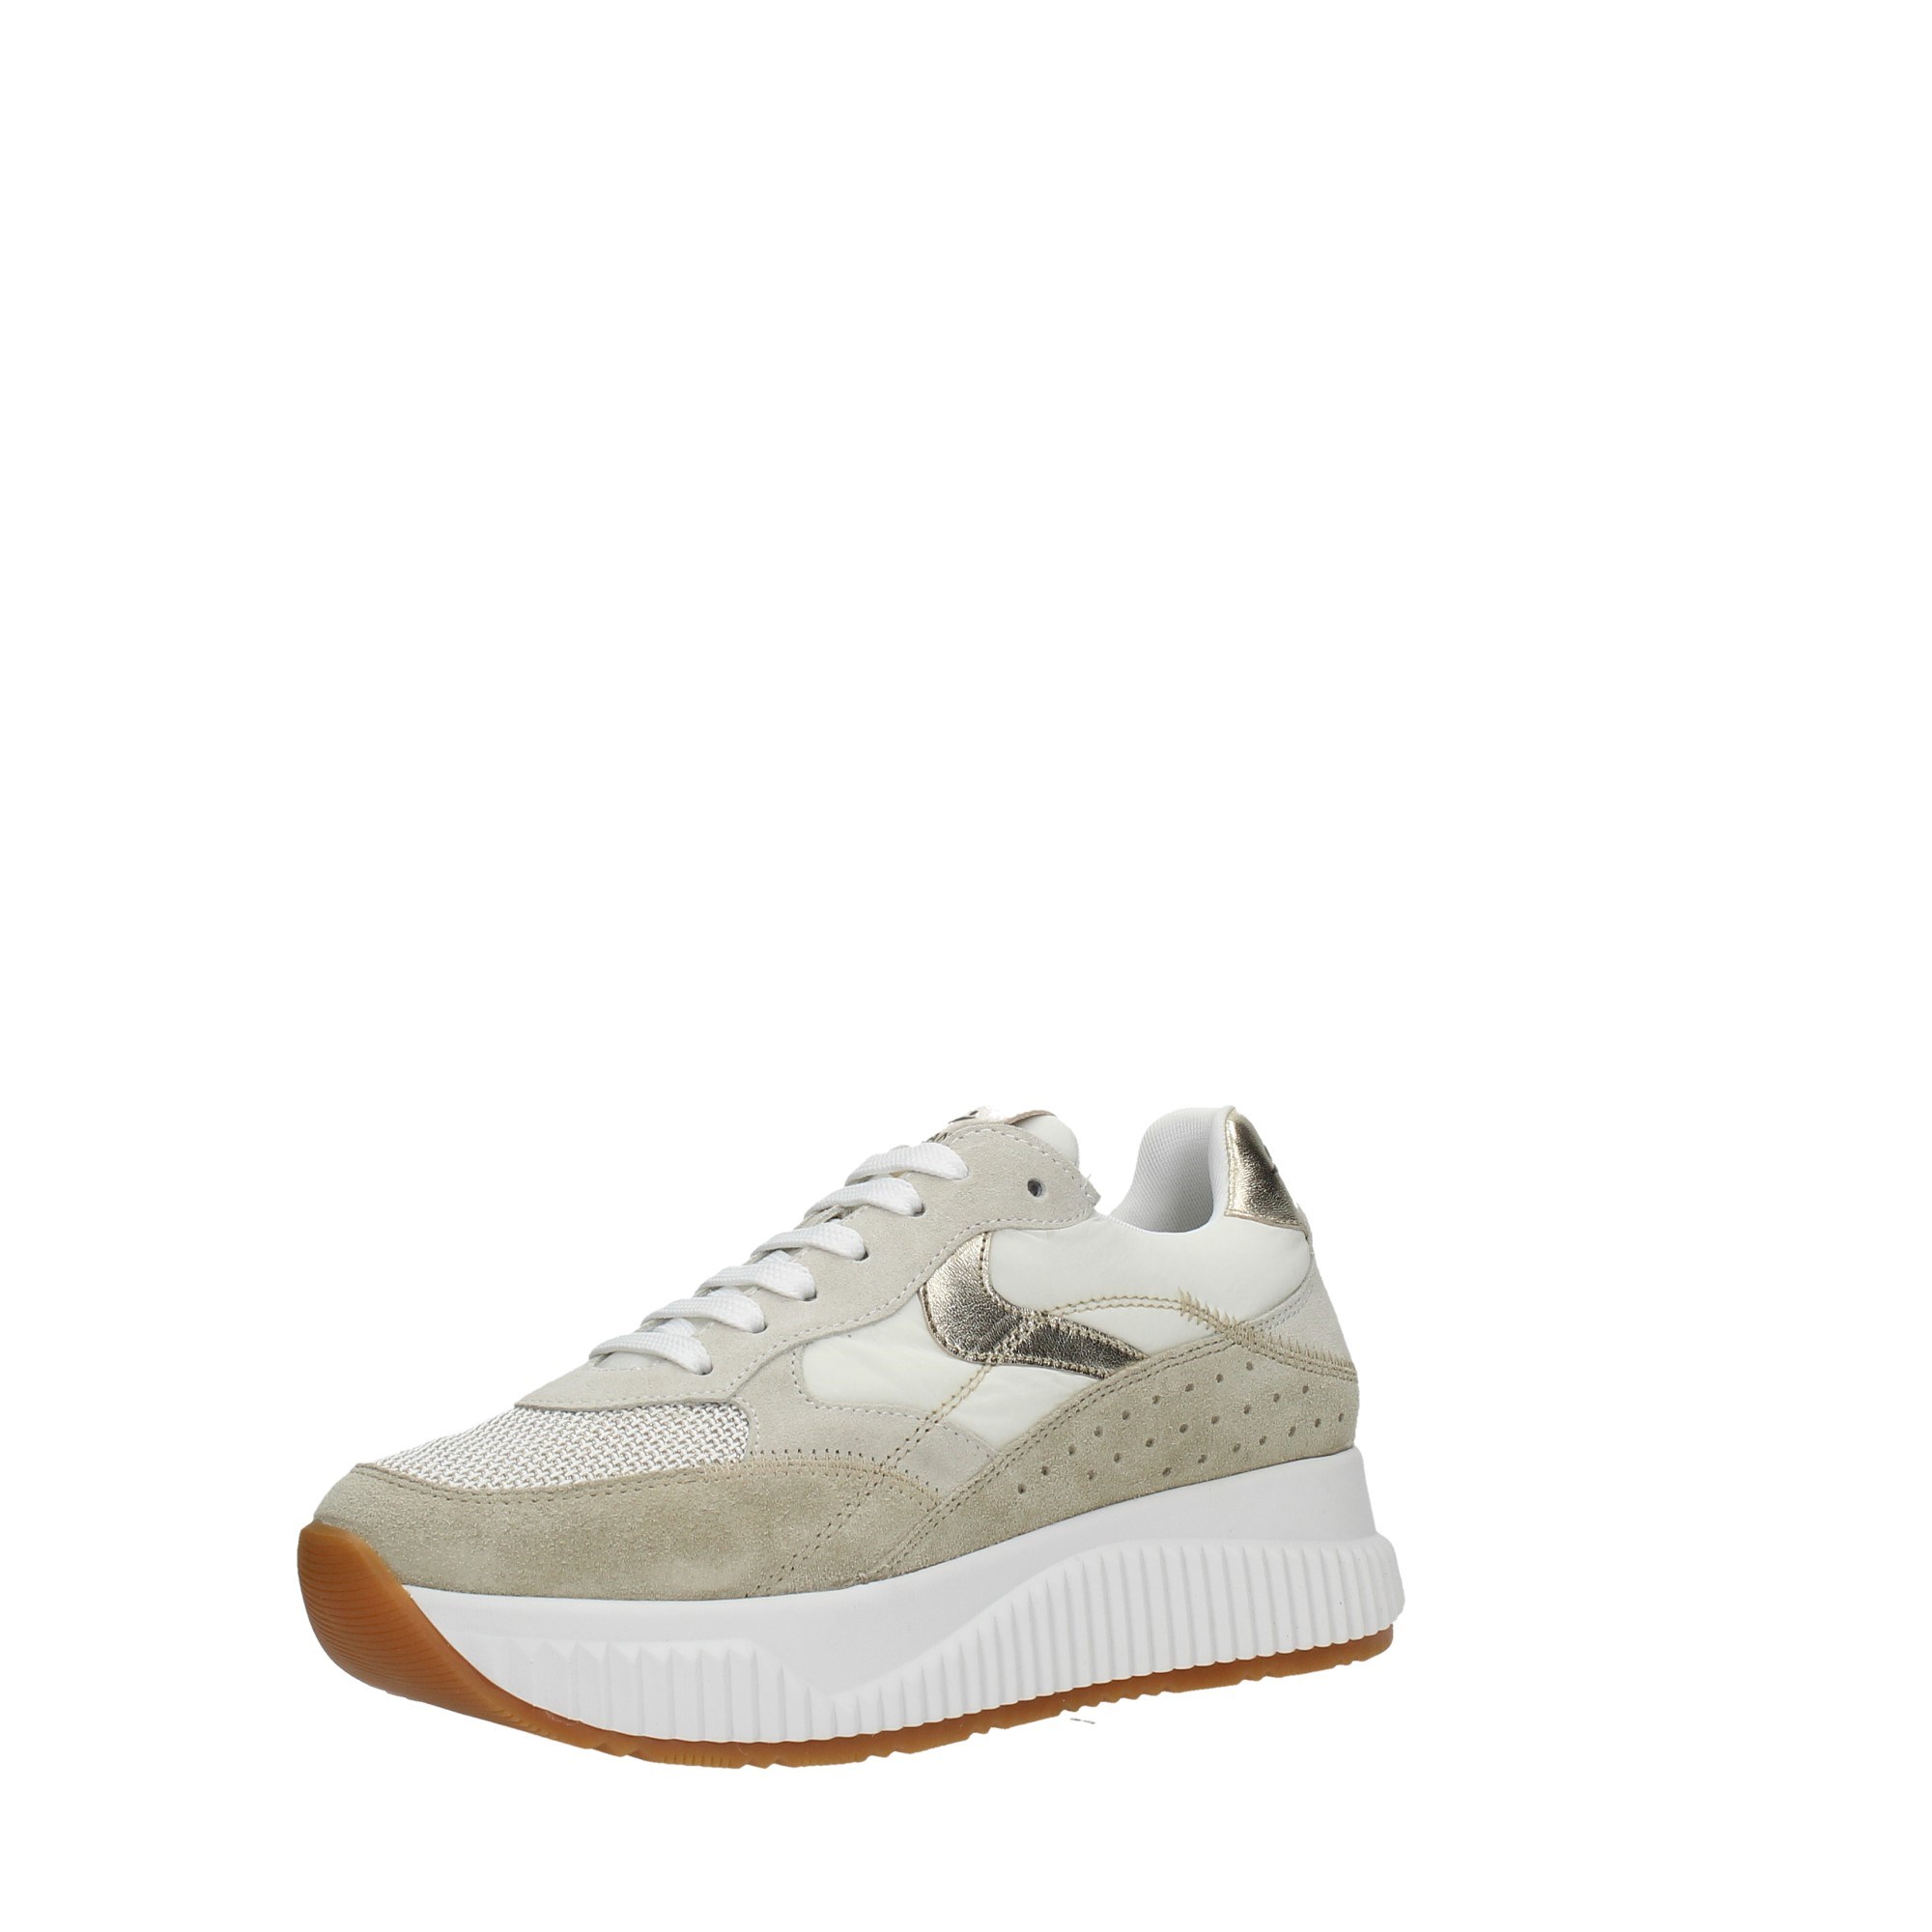 Voile Blanche Shoes Women Sneakers 201-8328-04